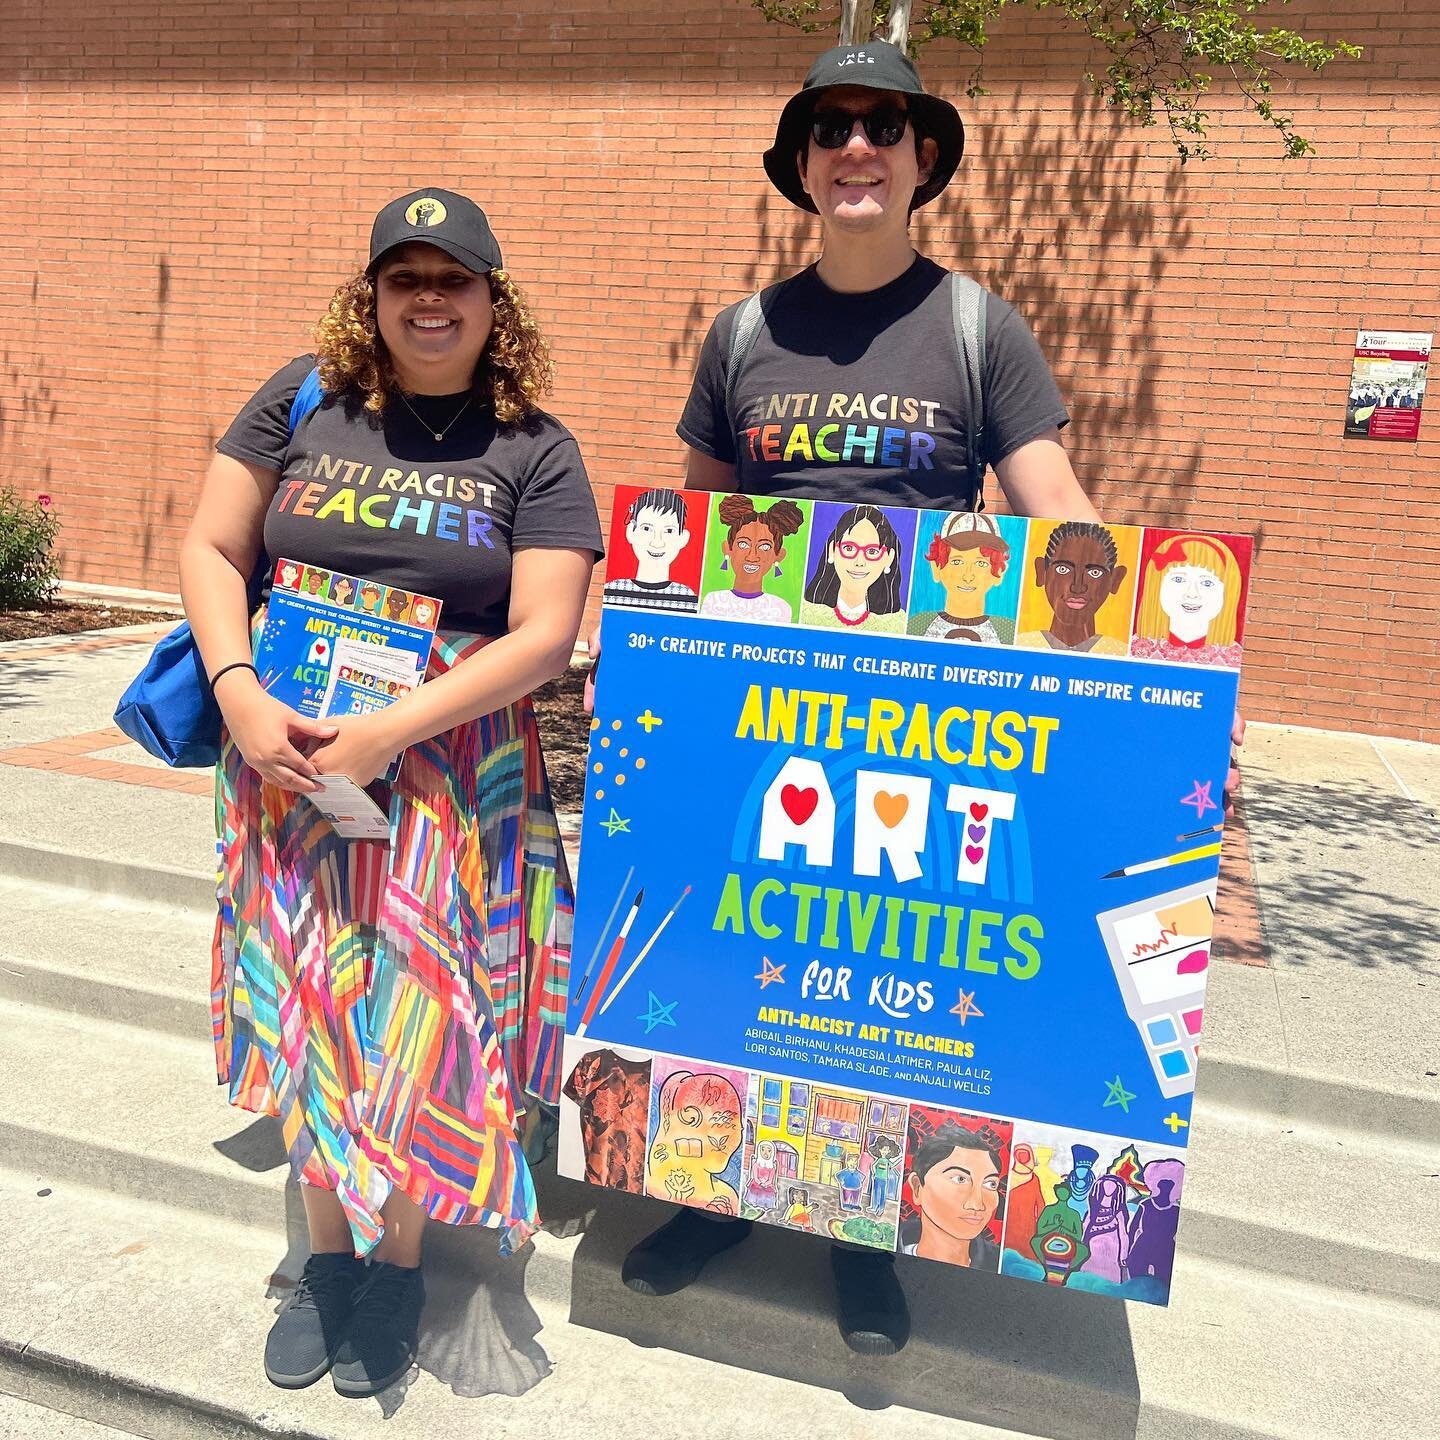 We made a new friend today! @teach4tamara was at #bookfest to hand out postcards about her new book ANTI-RACIST ART ACTIVITIES FOR KIDS by @antiracistartteachers Anti-Racist Art Teachers @ms_b_art_escapades @thebusybrushes @paulaliz.art @art4peacepro